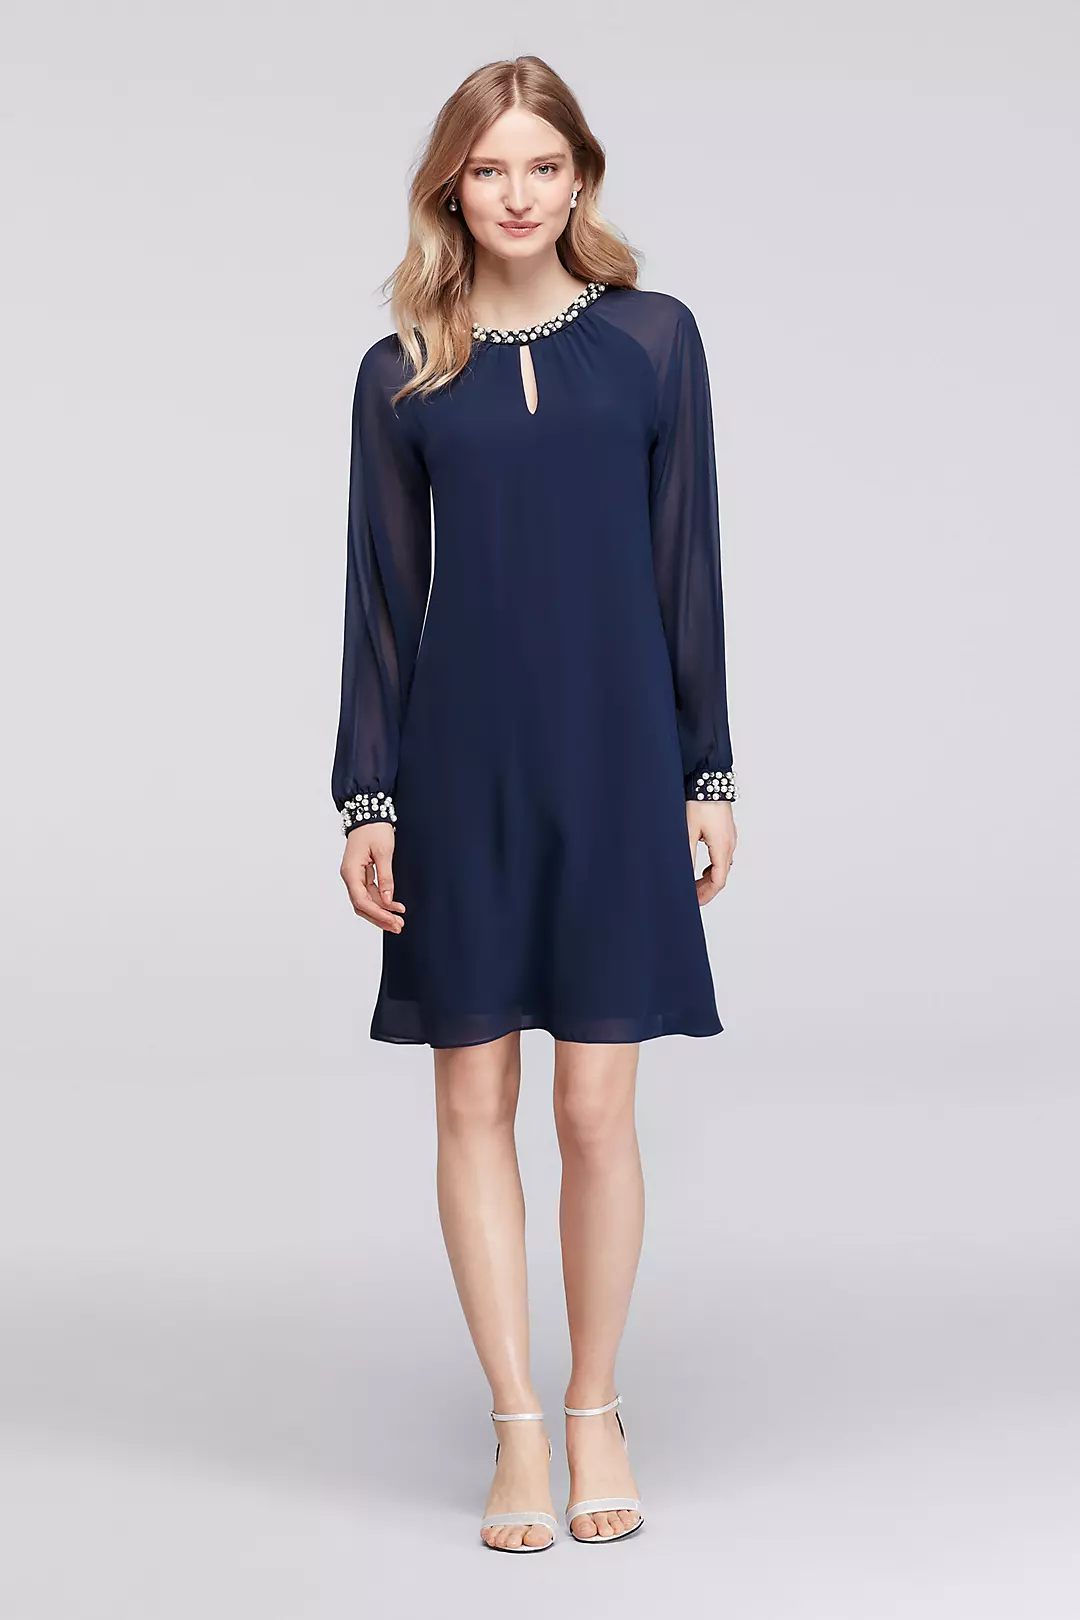 Knee Length Dress with Pearls at Neck and Cuffs Image